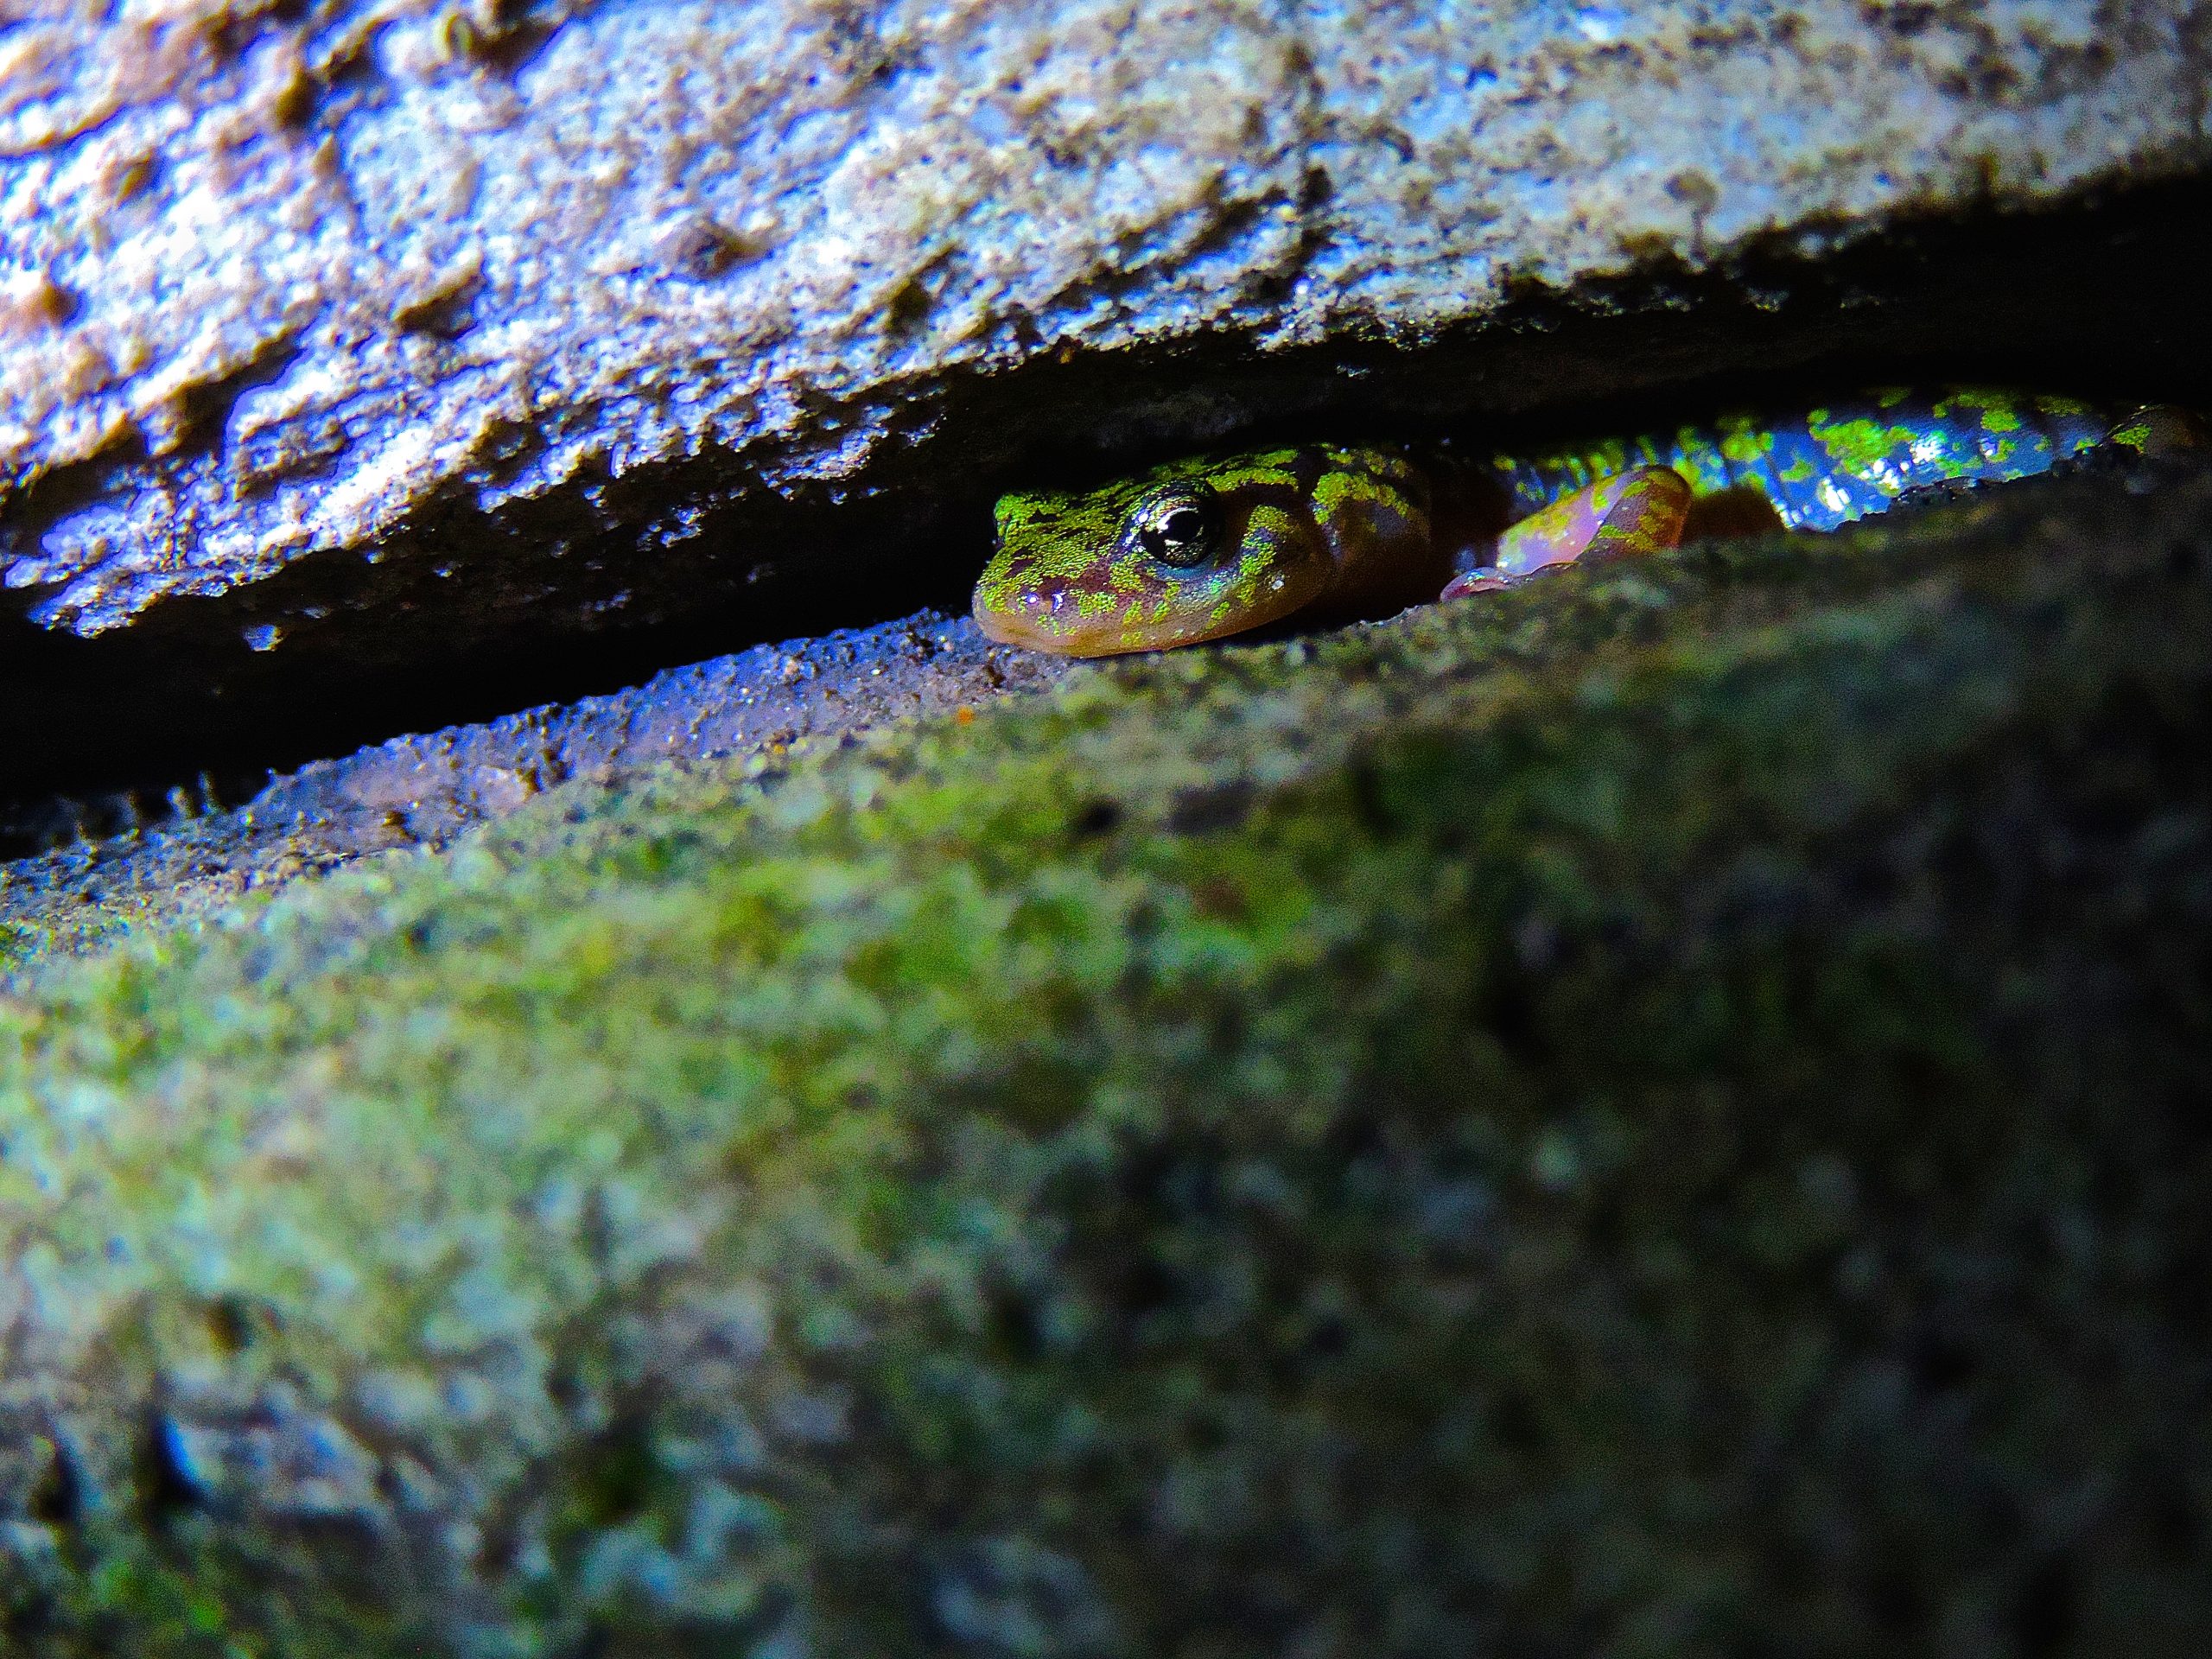 A green salamander shelters in a tight, rocky crevice with green flora in the foreground.